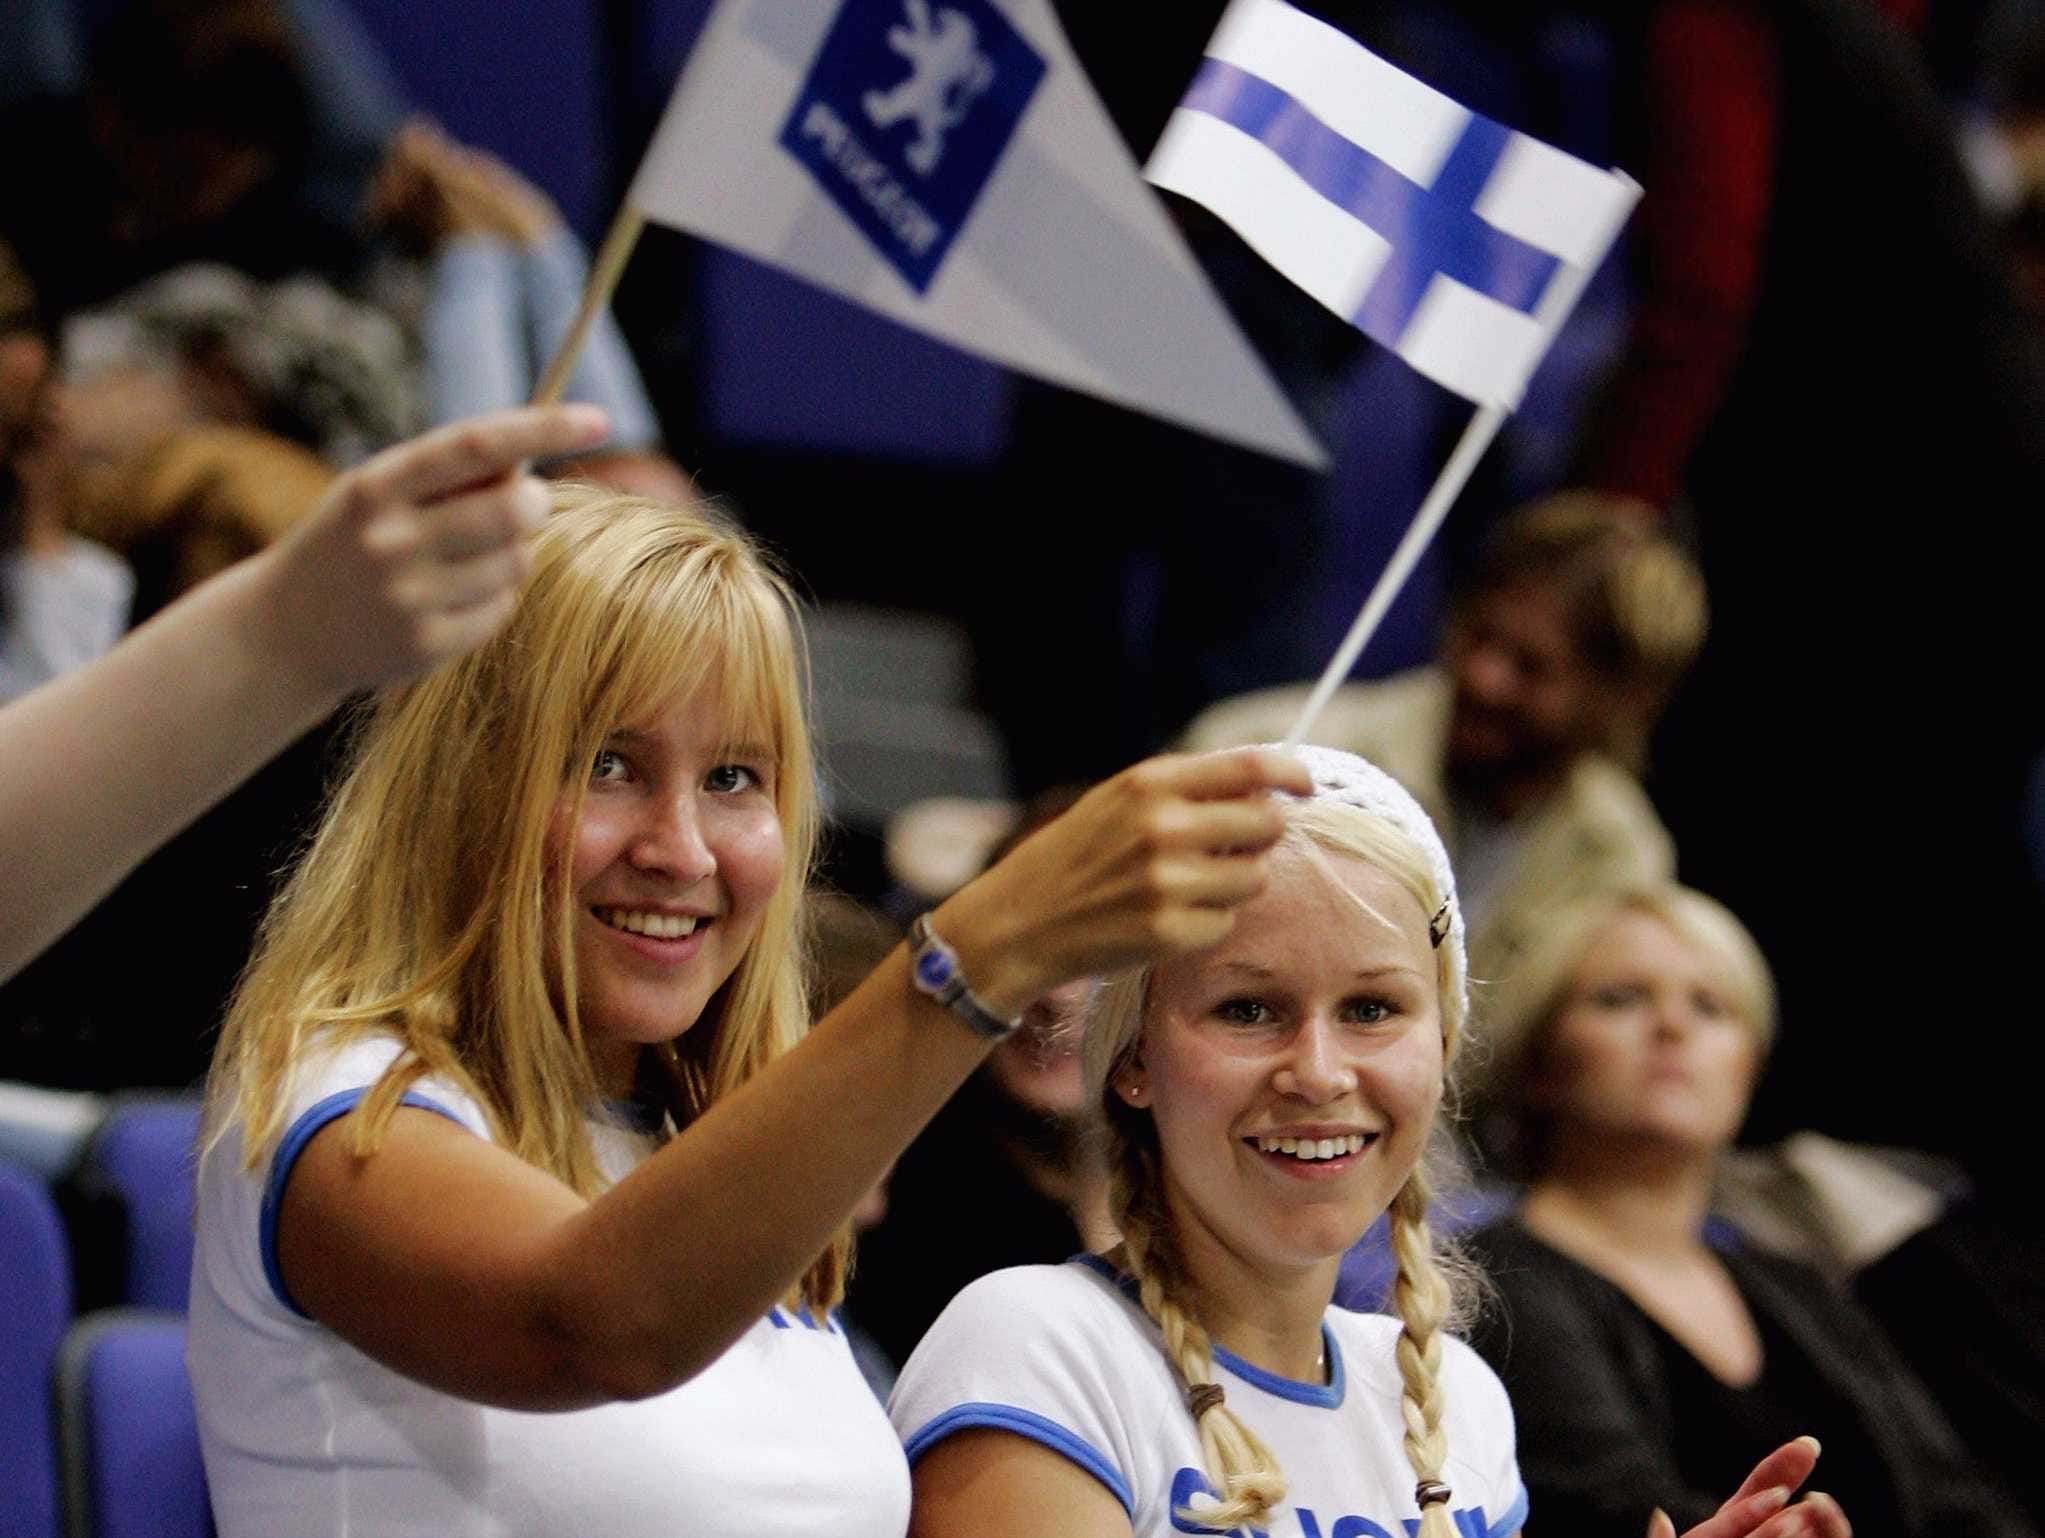 Finland has most people who are blonde